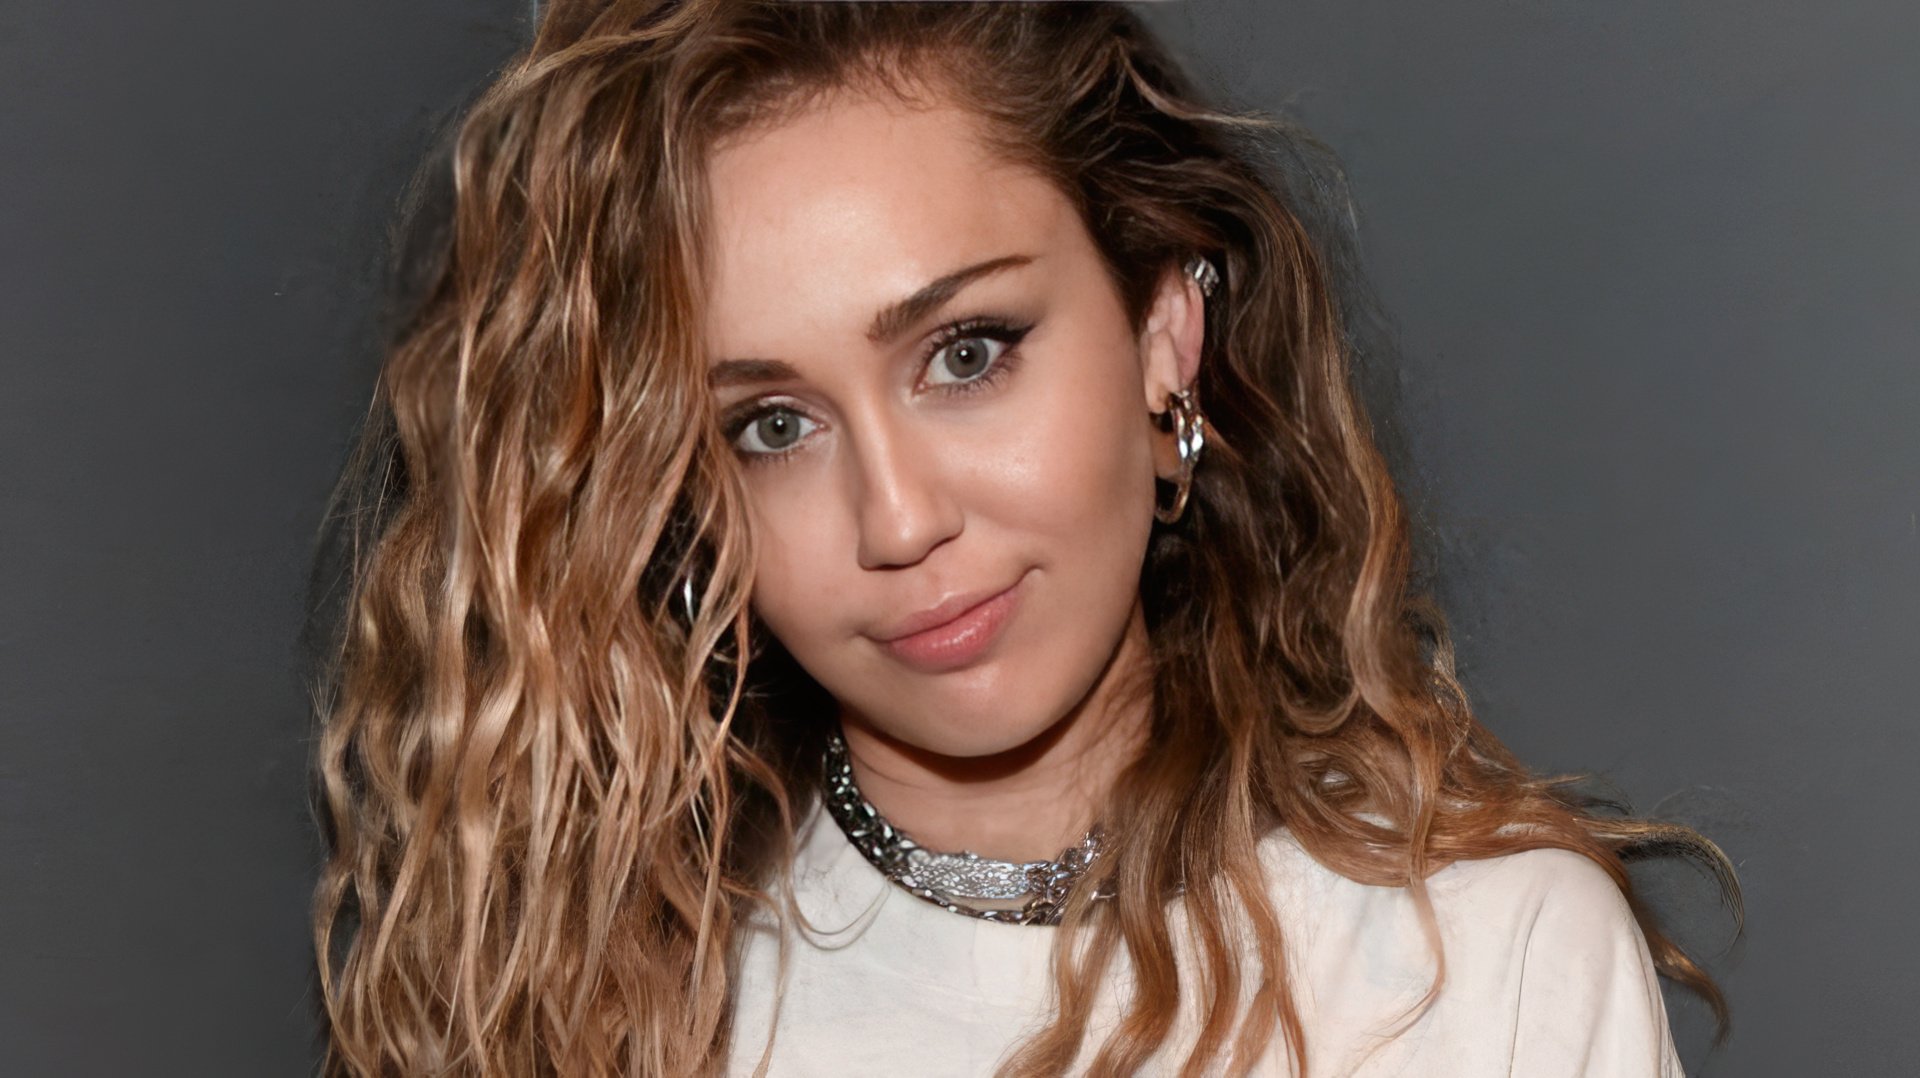 Actress and singer Miley Cyrus